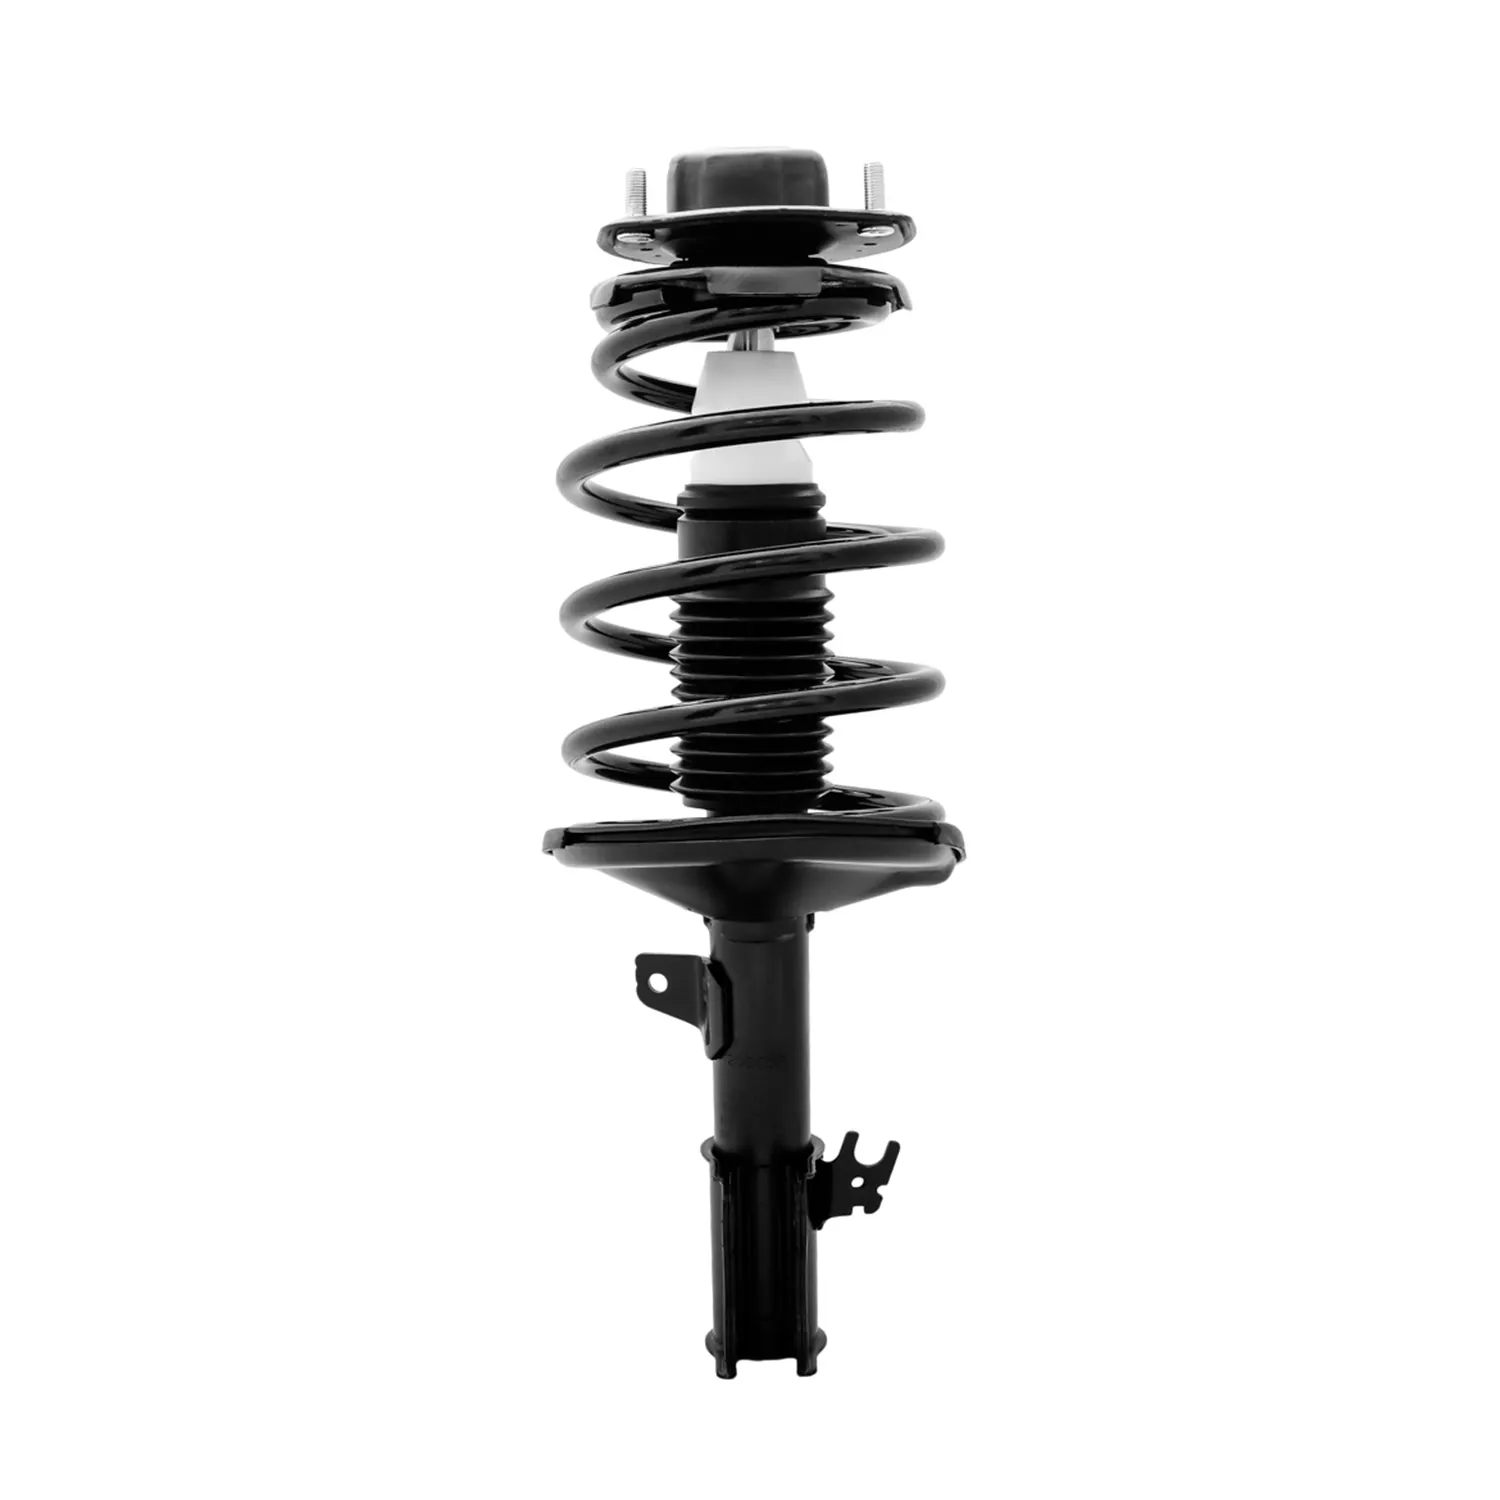 Eok hot sale High Quality Japan Kyb Standard Twin Tube Shock Absorber Front 271678 suspension system